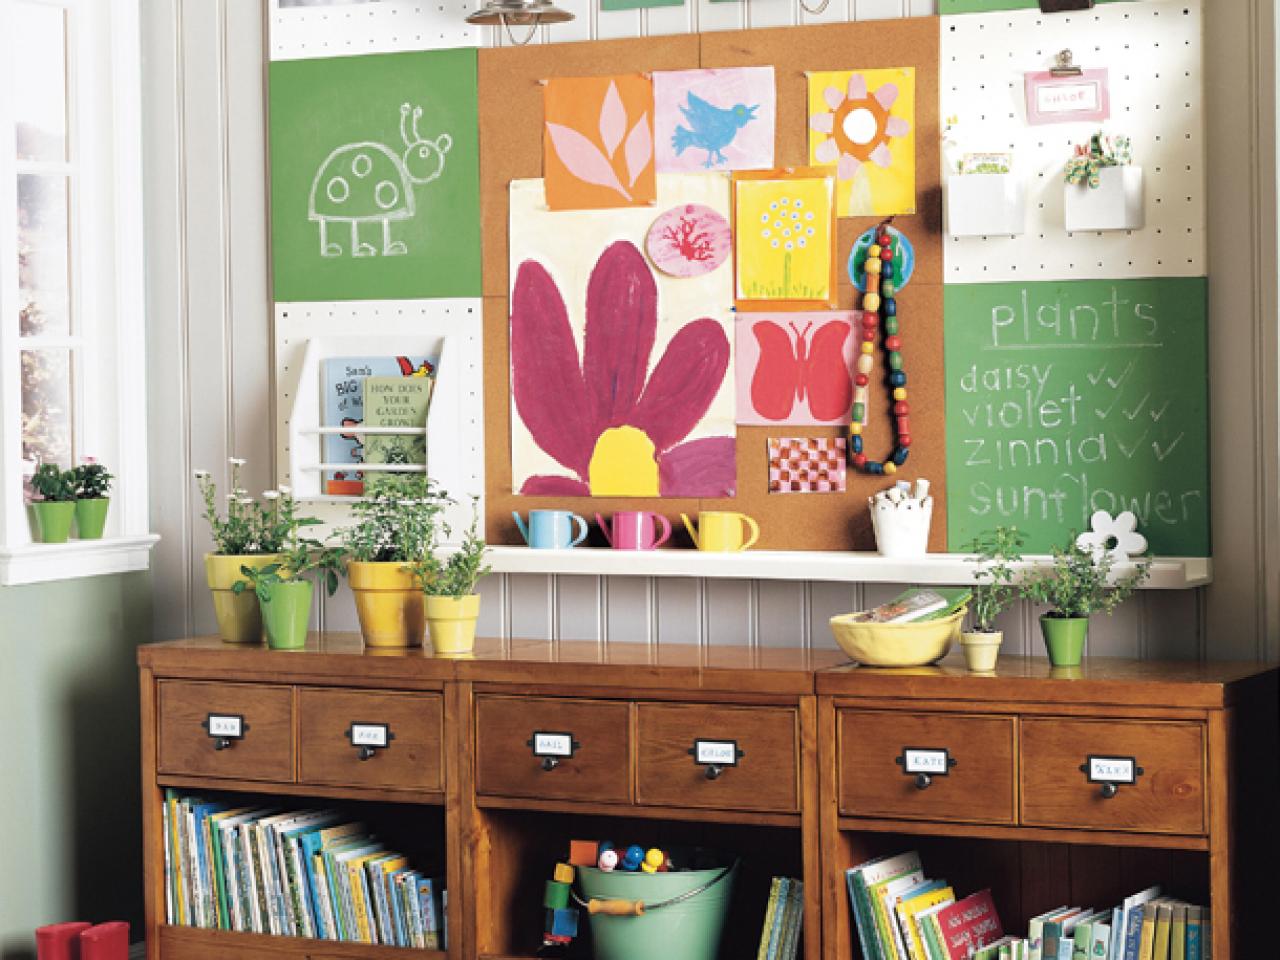 Cozy 10 Decorating Ideas for Kidsu0027 Rooms room decorating ideas for kids